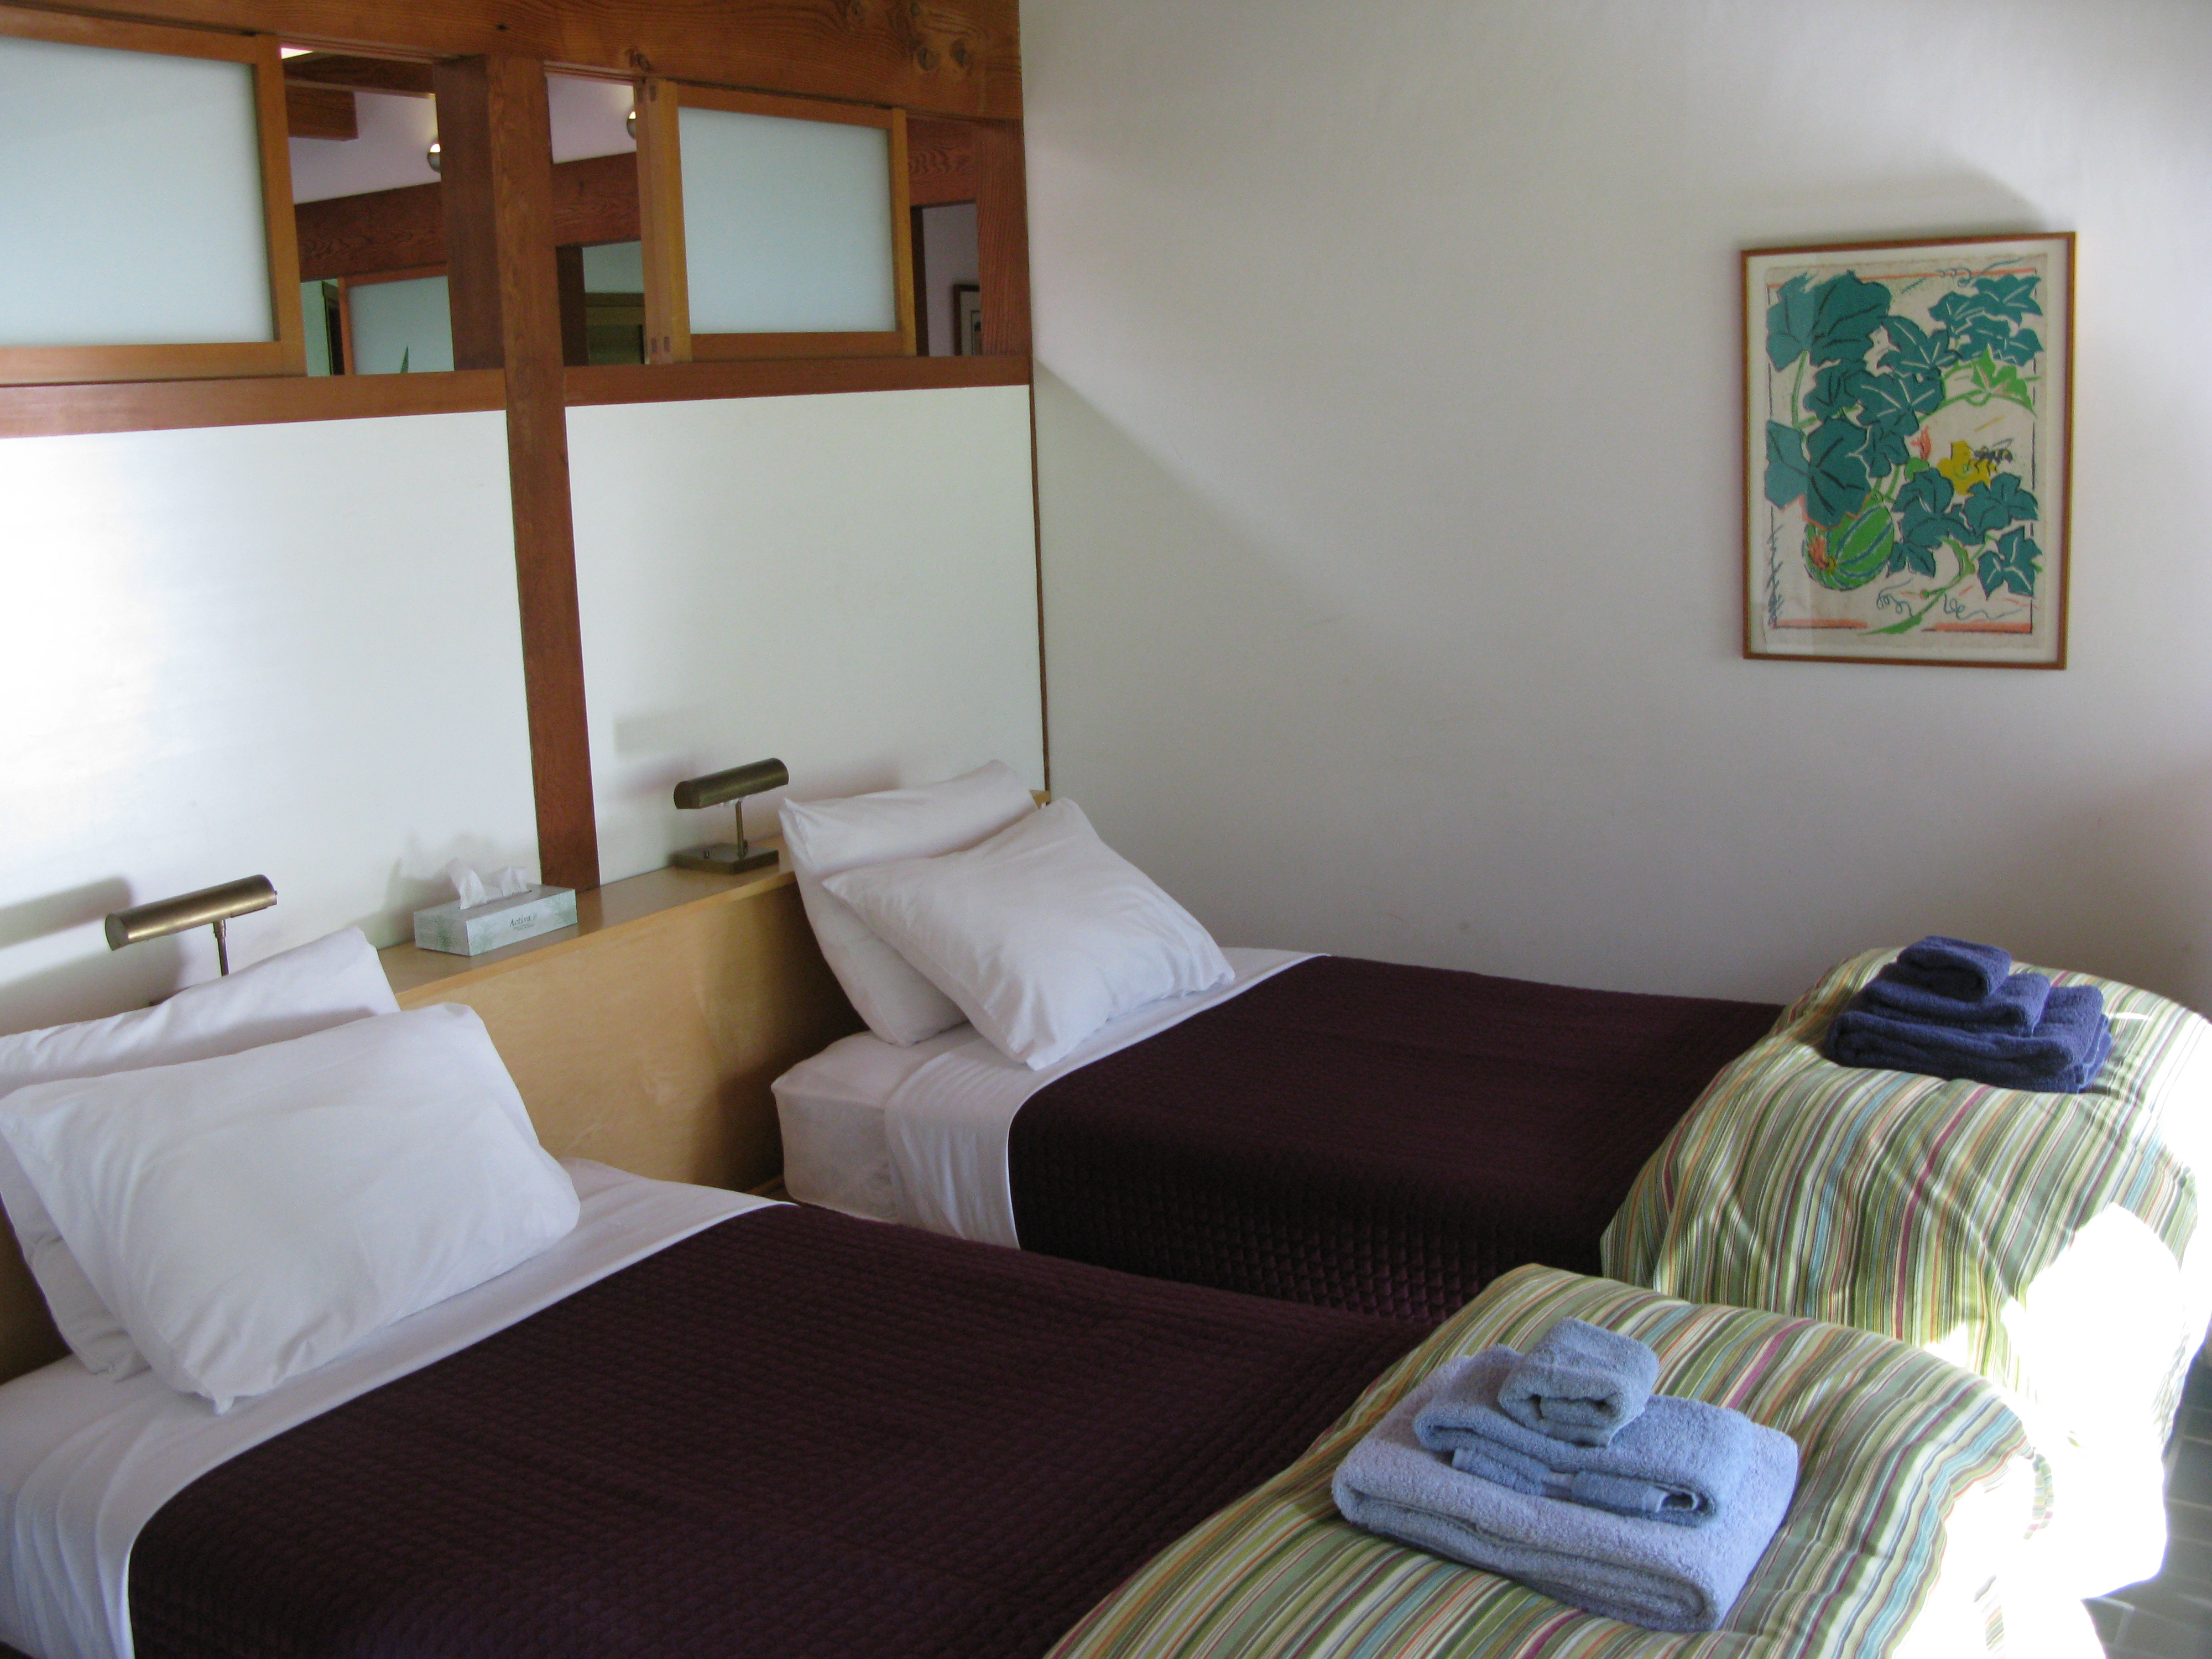 Guest House - Large Room (2 beds)